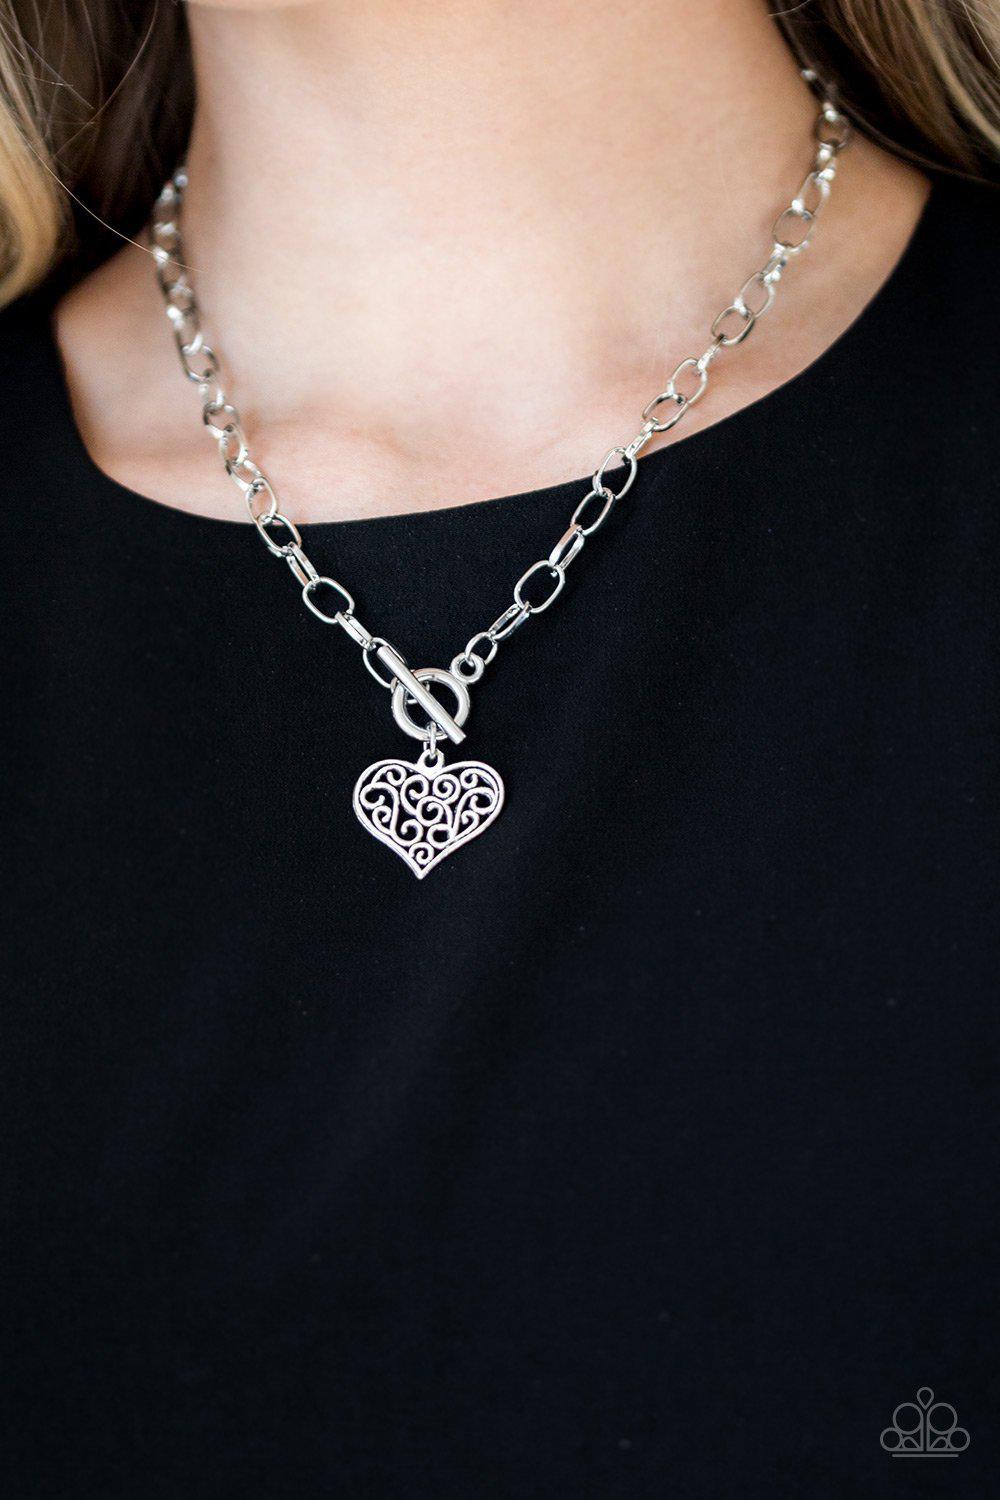 Heart Touching Harmony Silver Heart Necklace - Paparazzi Accessories-CarasShop.com - $5 Jewelry by Cara Jewels